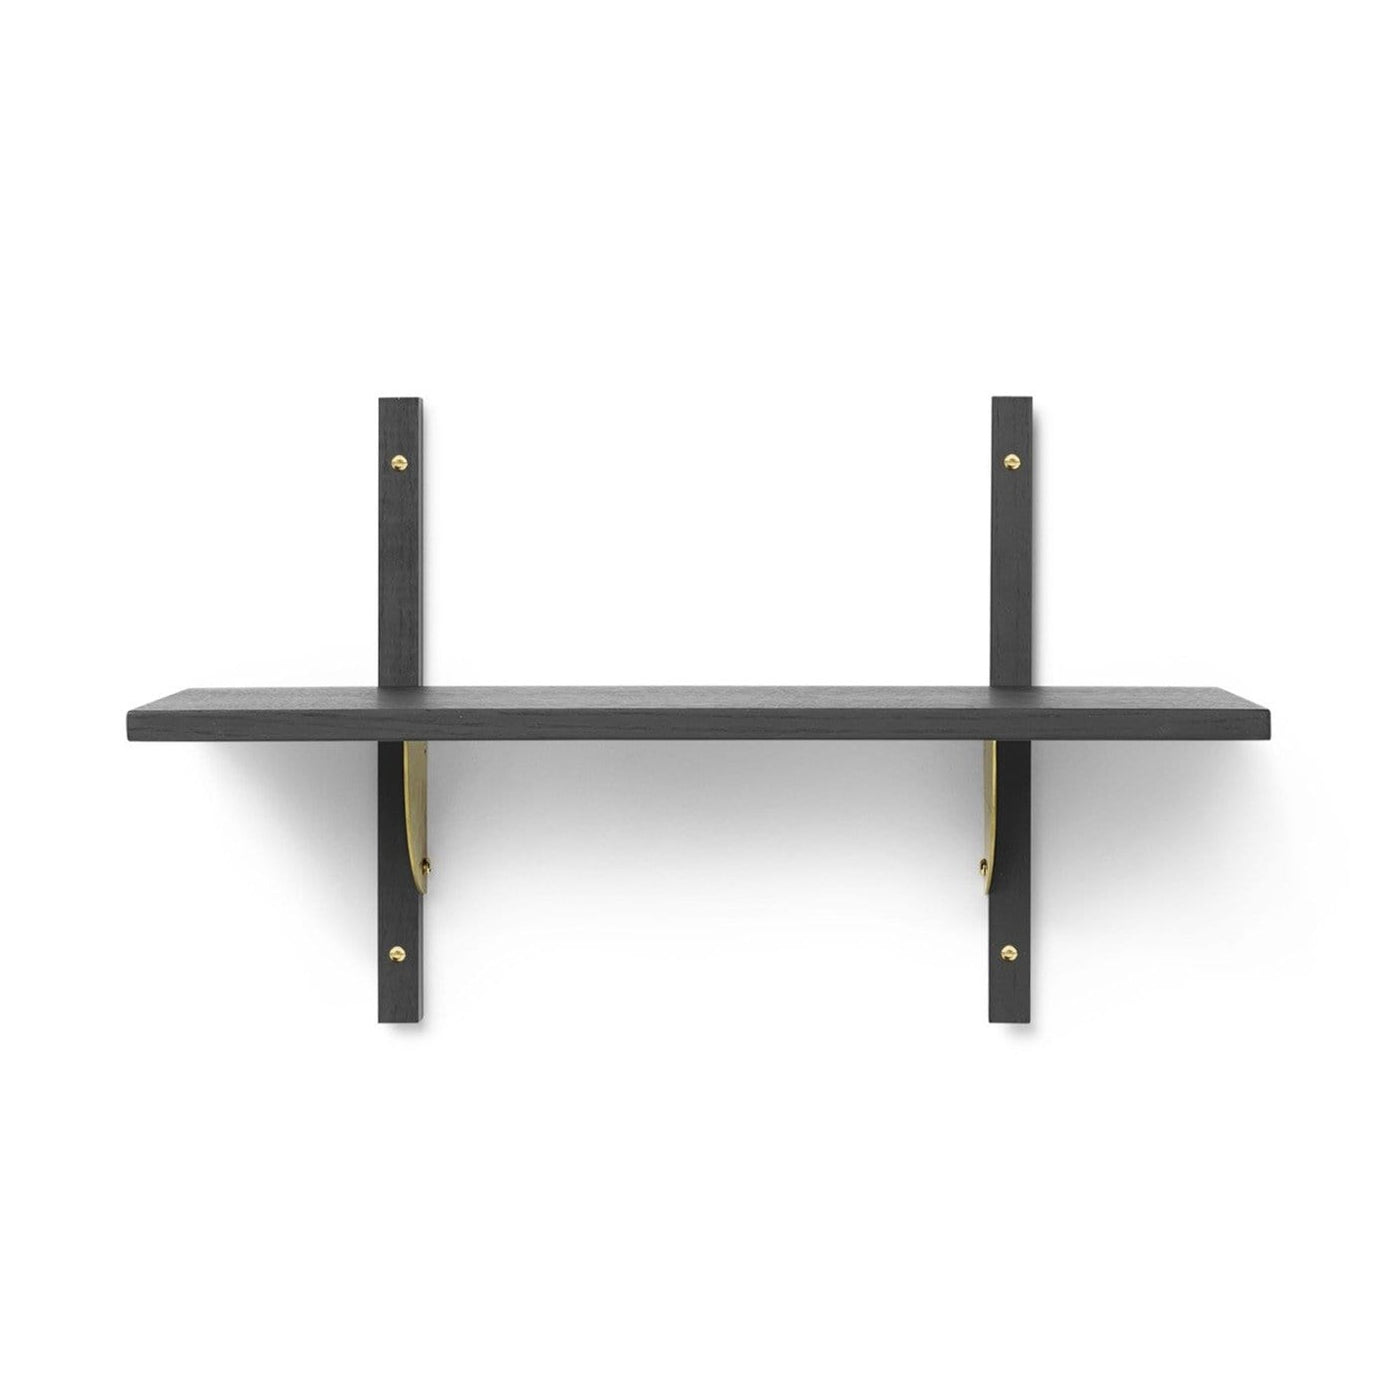 Ferm Living Sector shelf, single narrow in black ash with polished brass brackets. Available from someday designs